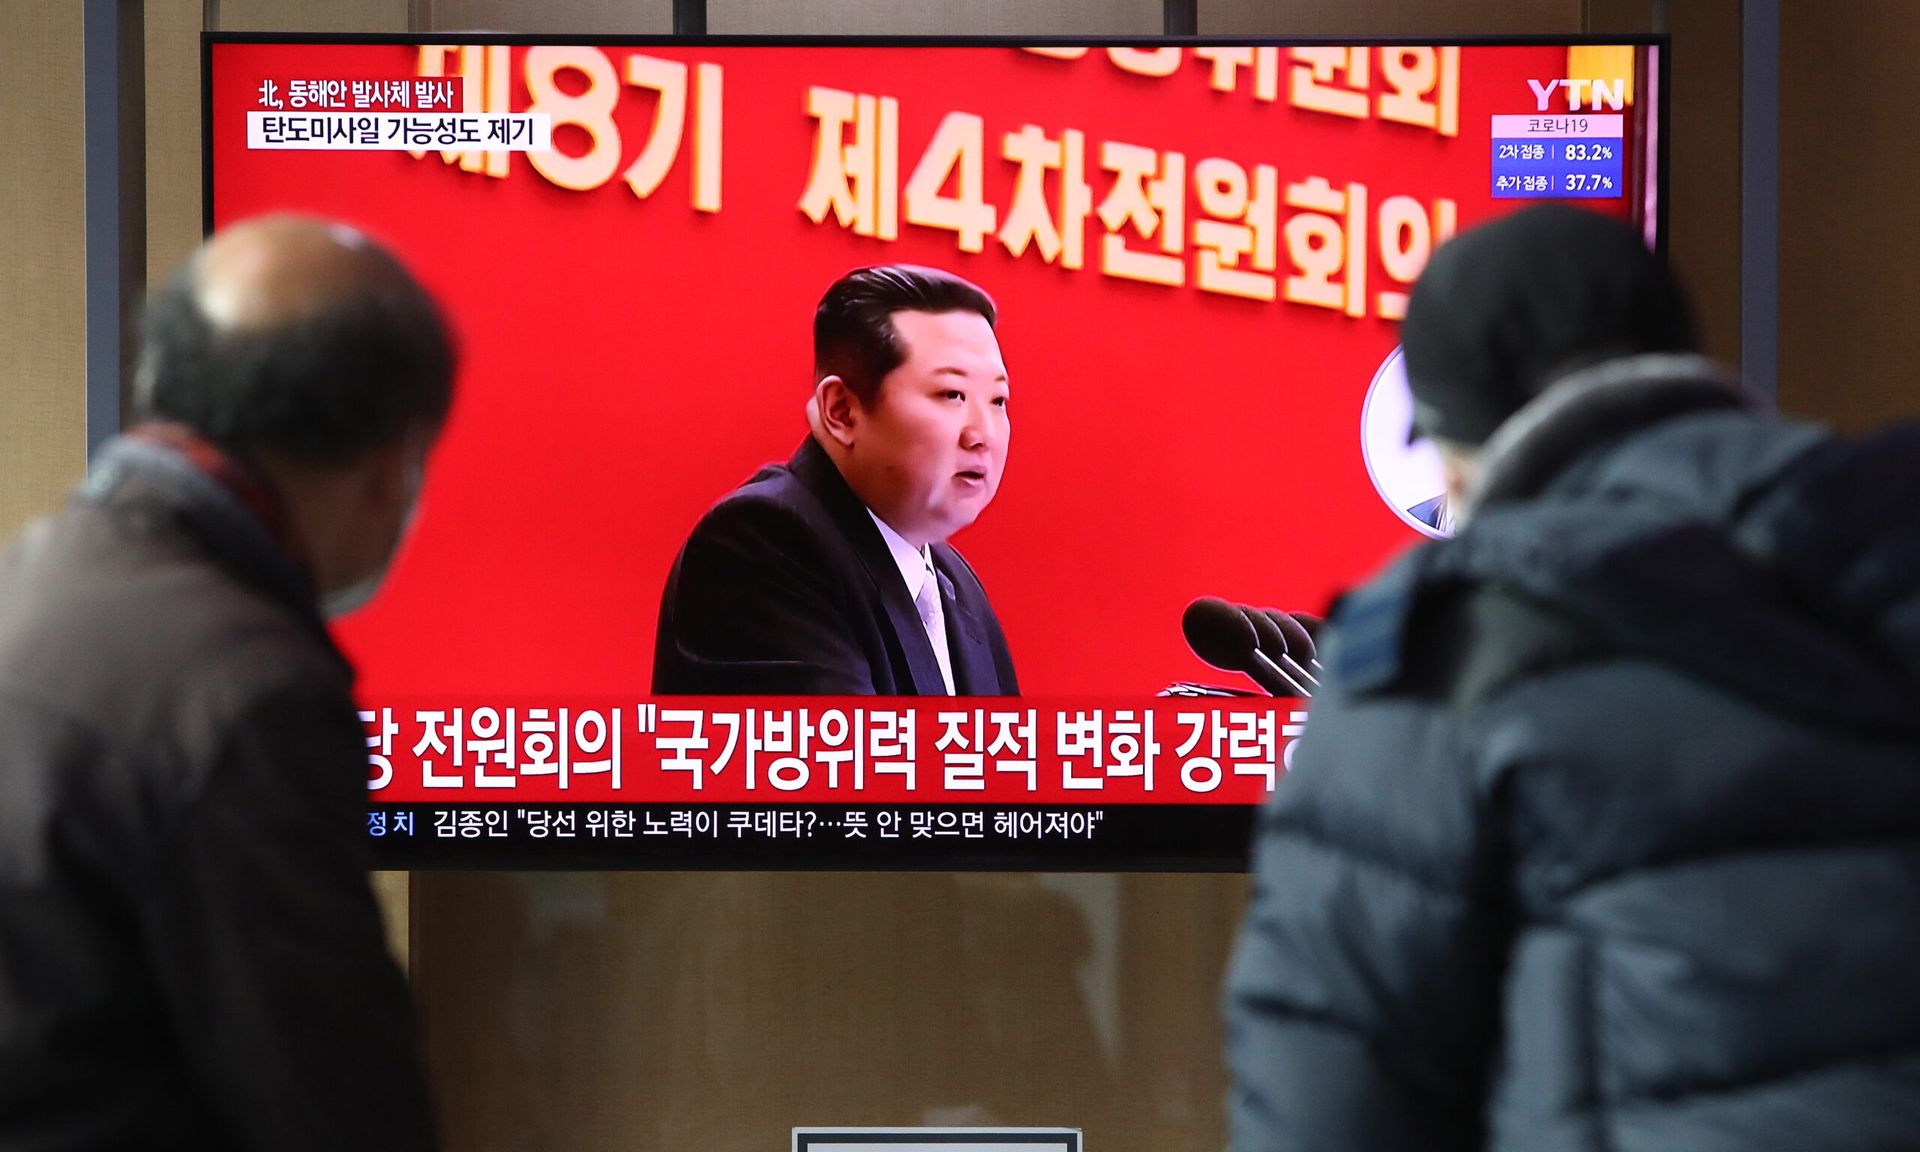 Mandiant and Google reported separately on threats originating from North Korea-backed groups. Pictured: People watch a television broadcast reporting on North Korean Kim Jong-un at the Seoul Railway Station on Jan. 5, 2022, in Seoul, South Korea. (Photo by Chung Sung-Jun/Getty Images)